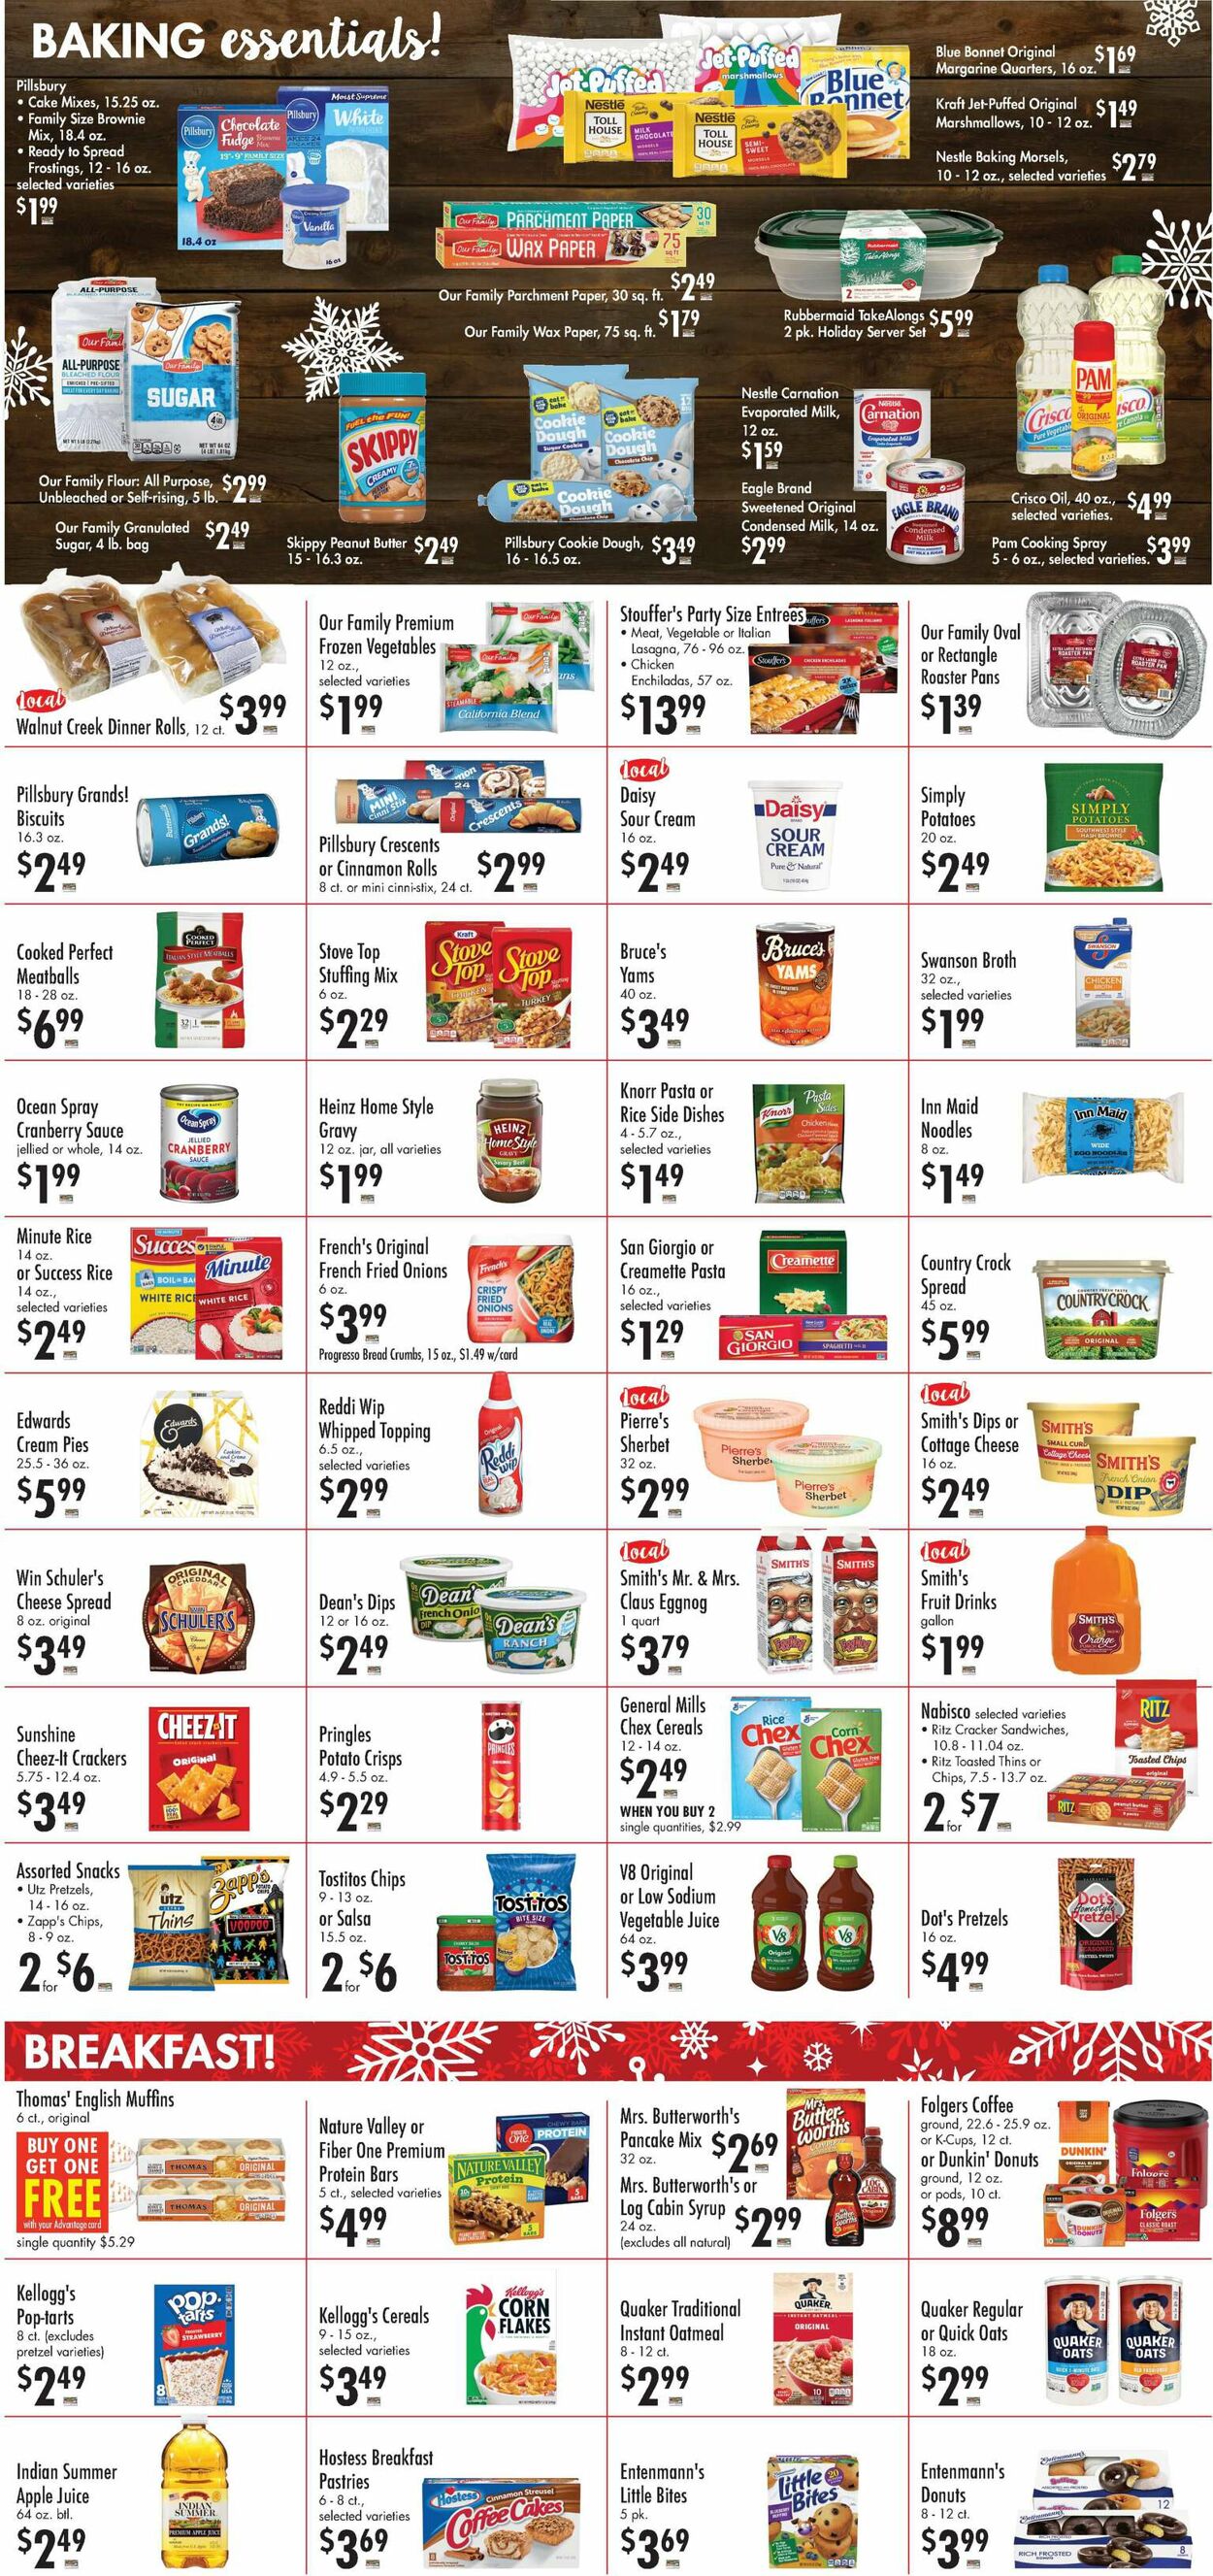 Catalogue Buehler's Fresh Foods from 12/21/2022